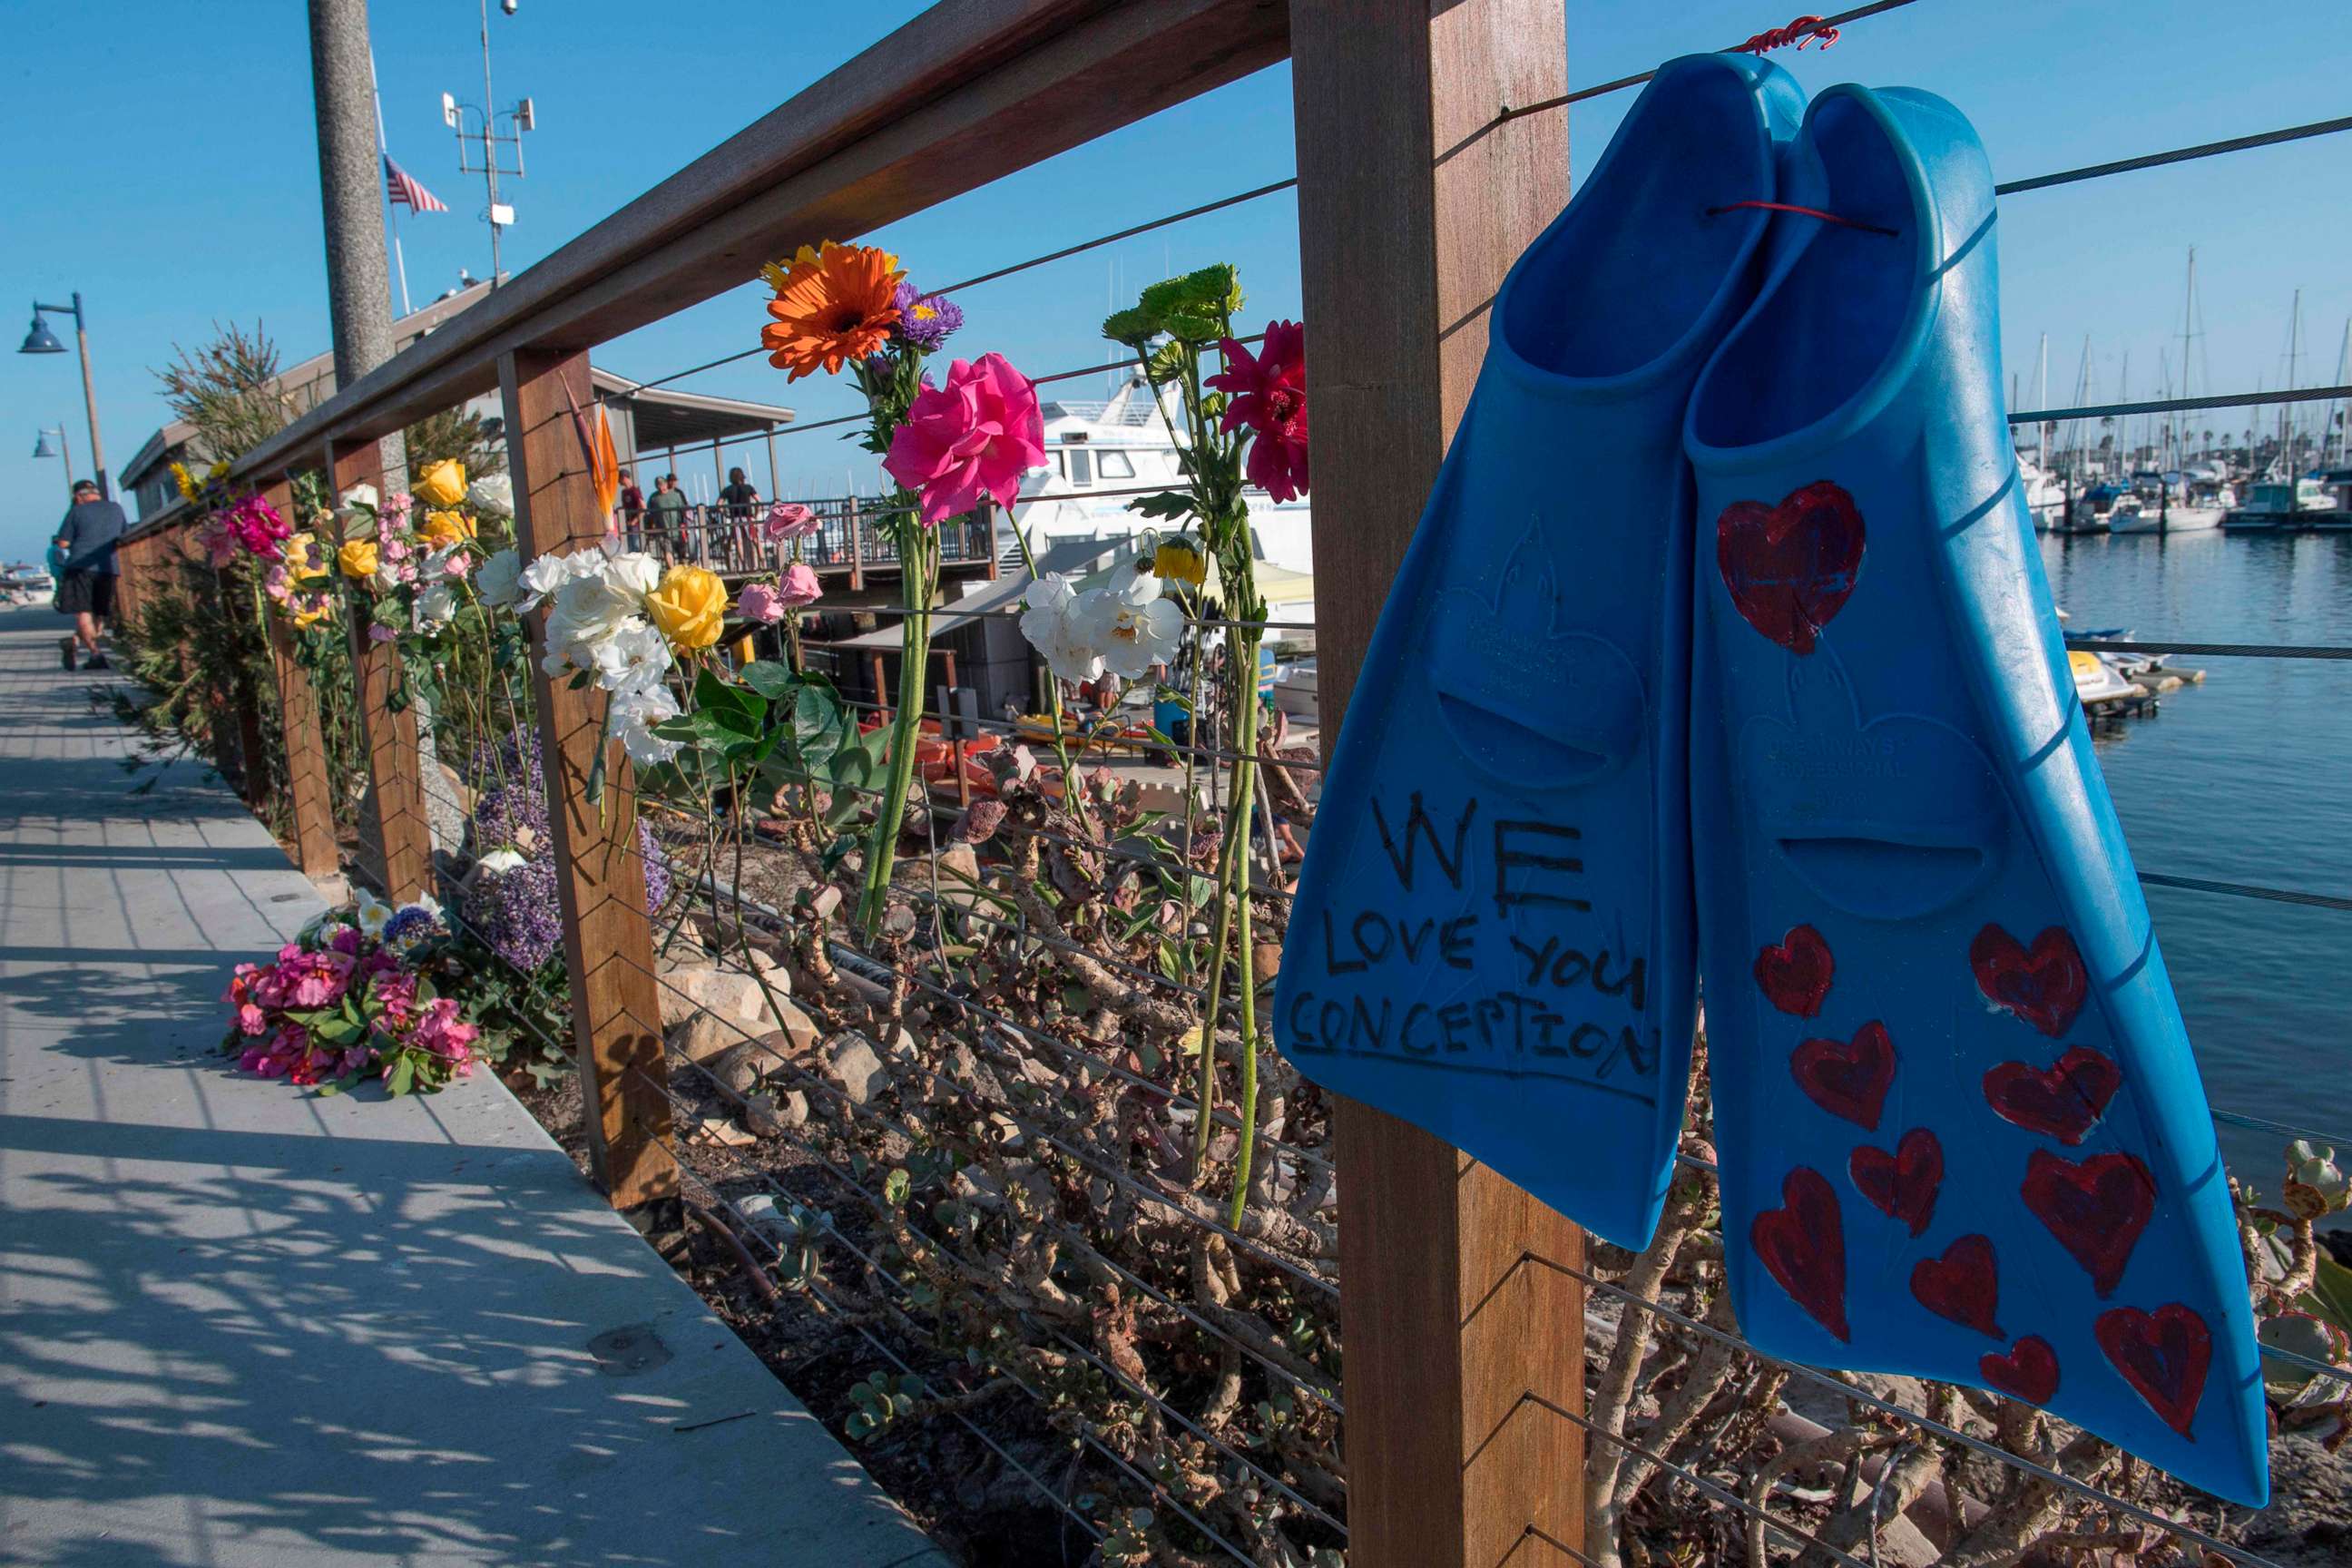 PHOTO: A pair of diving fins and flowers at a memorial wall near the Truth Aquatics moorings where the boat that burned and sank off the Santa Cruz islands, was based in Santa Barbara, Calif., on Sept. 2, 2019.